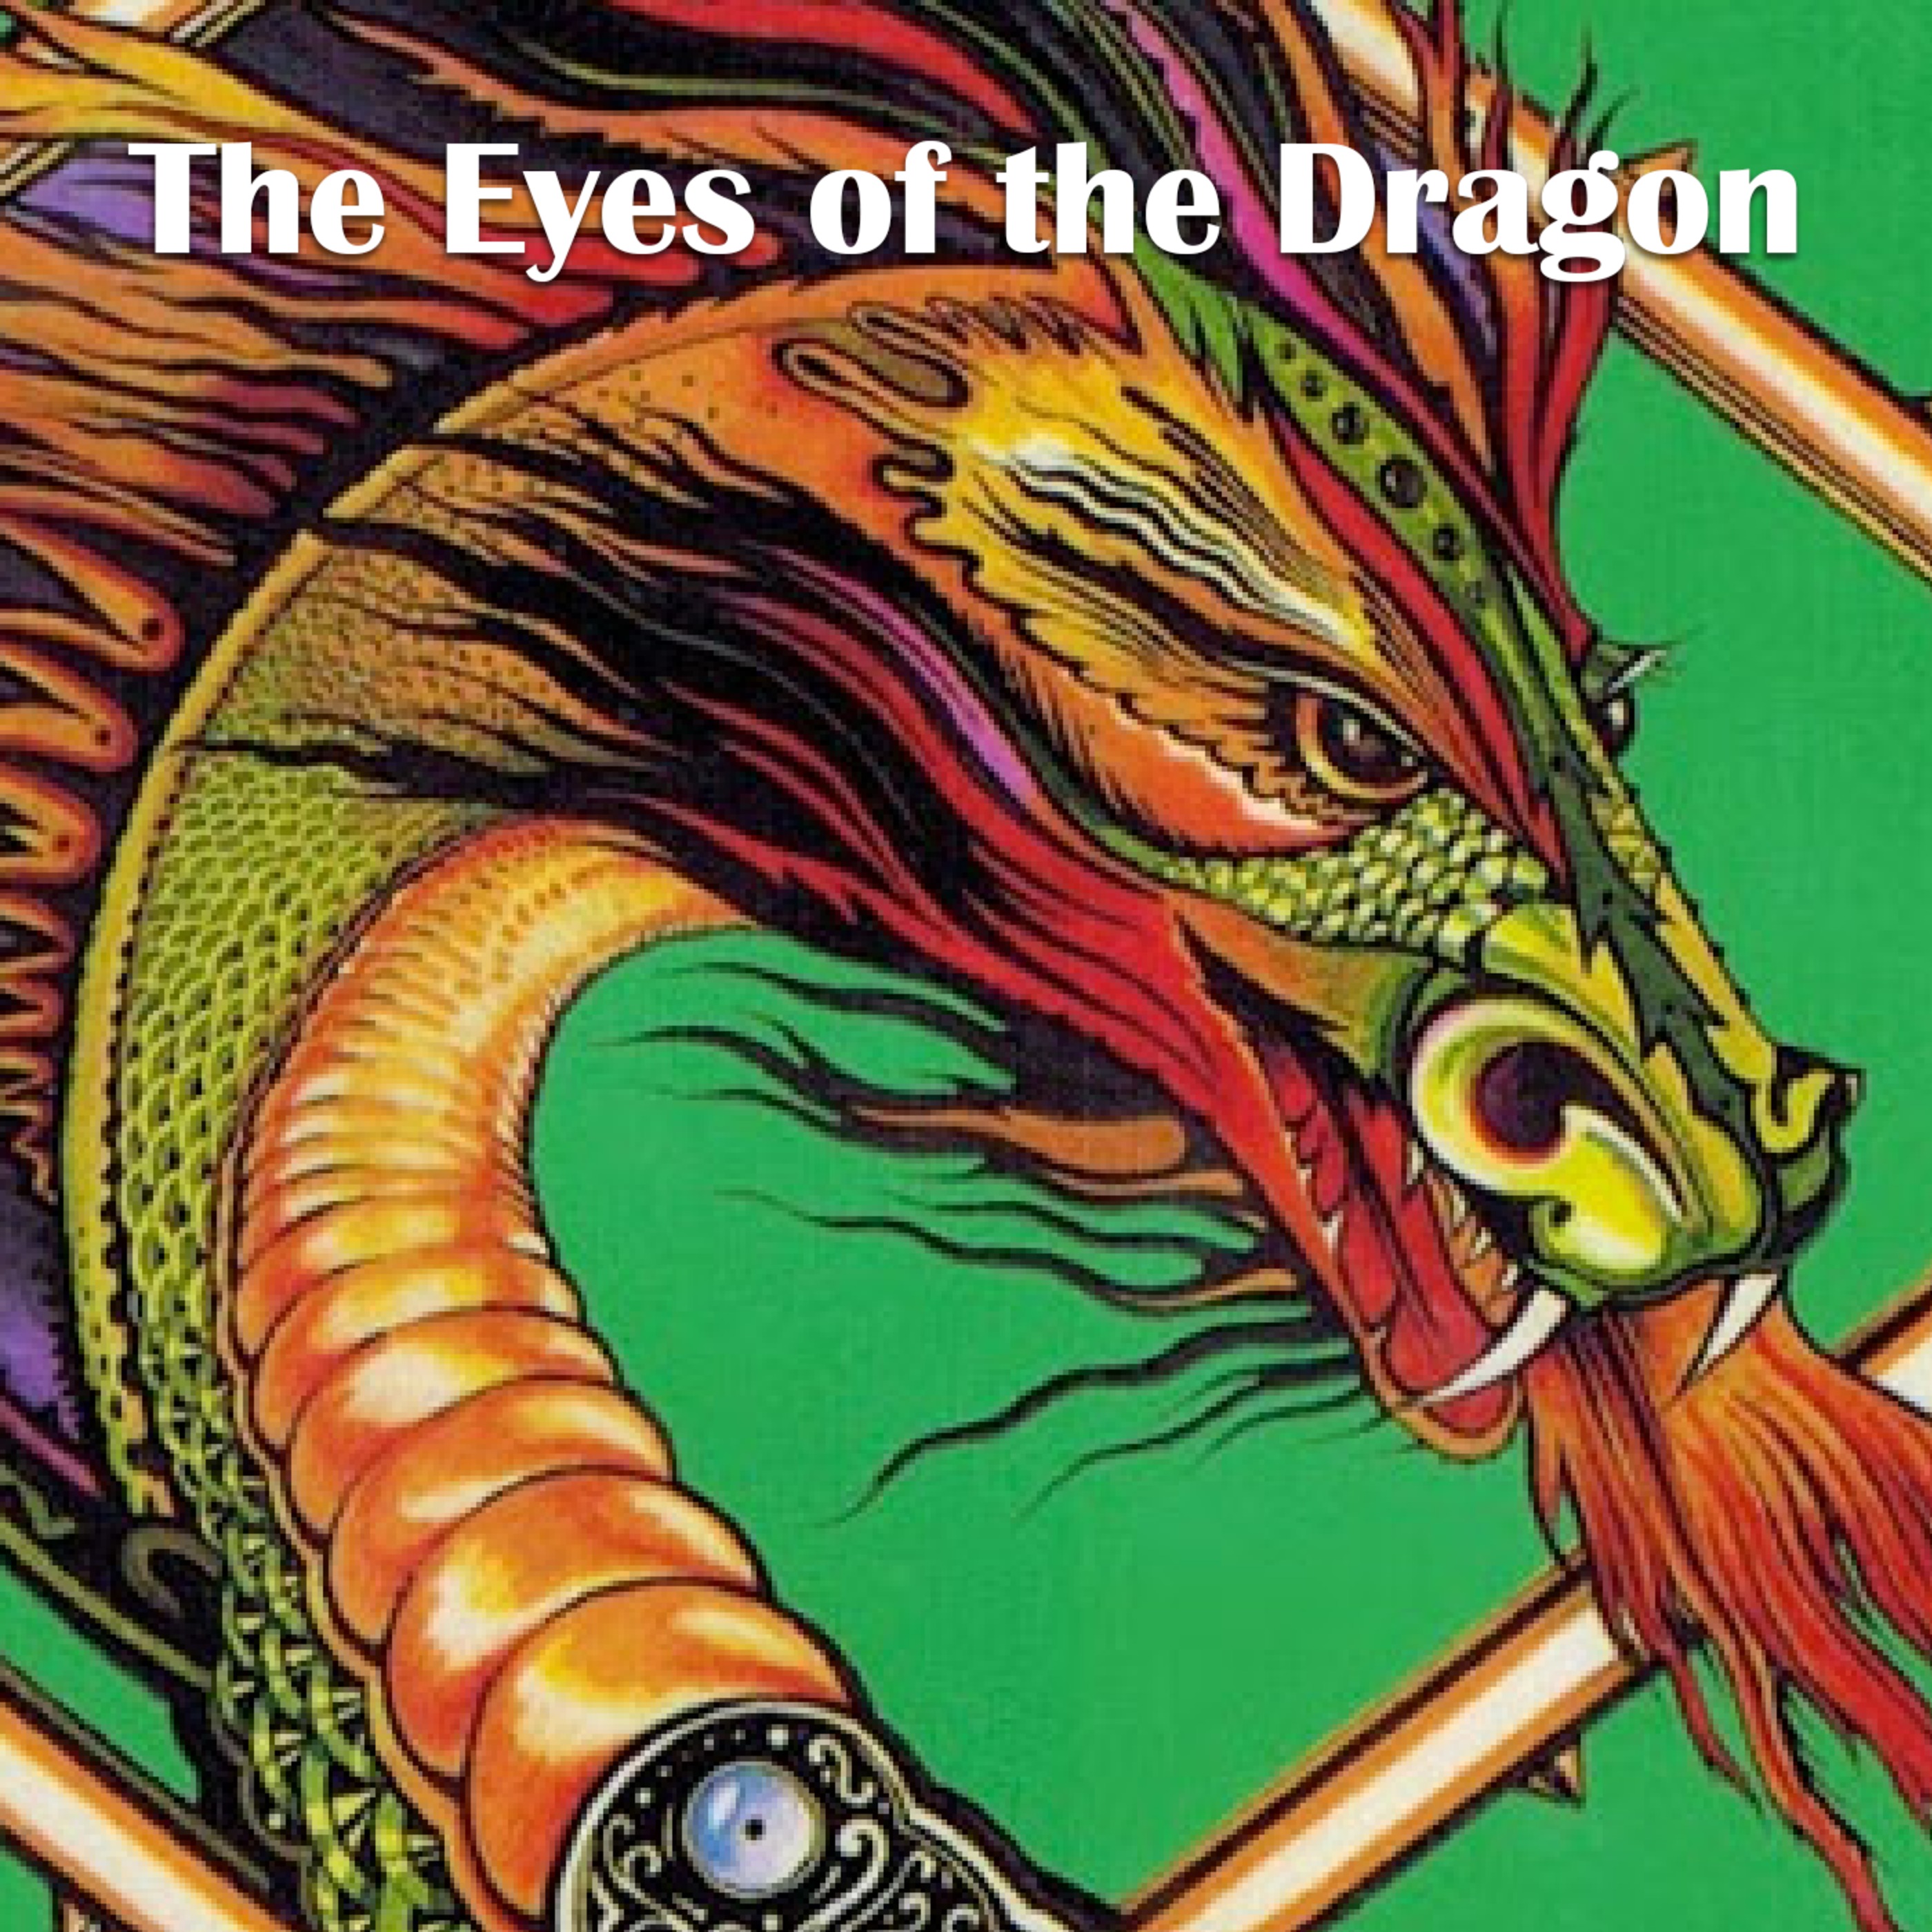 Episode 6: The Eyes of the Dragon